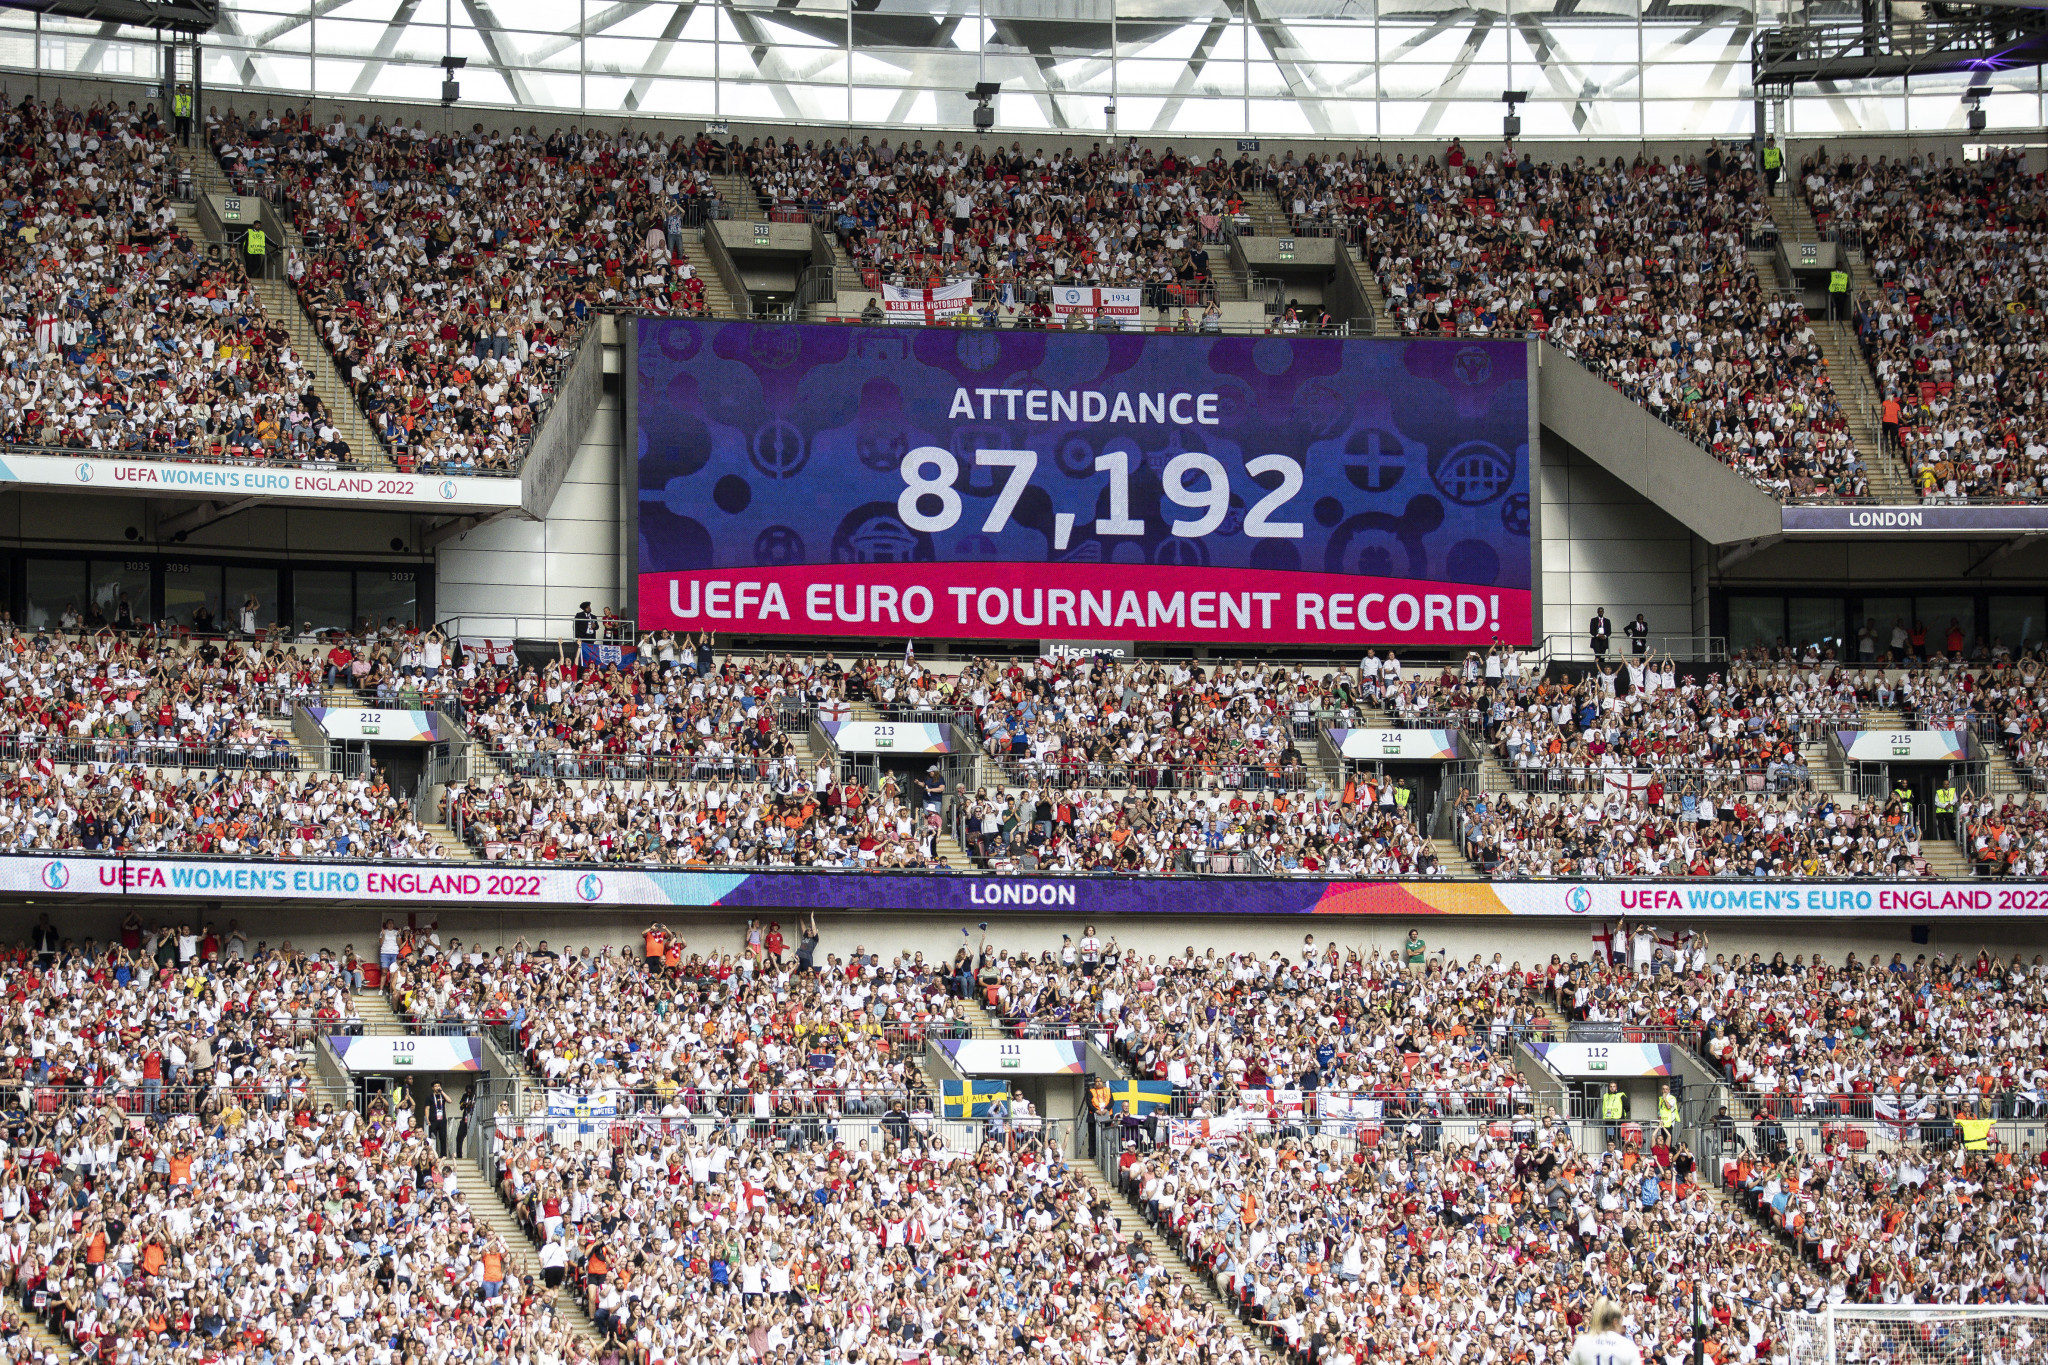 The UEFA Women's Euro 2022 tournament was part of England's summer of sport, and broke attendance records along the way ©Getty Images